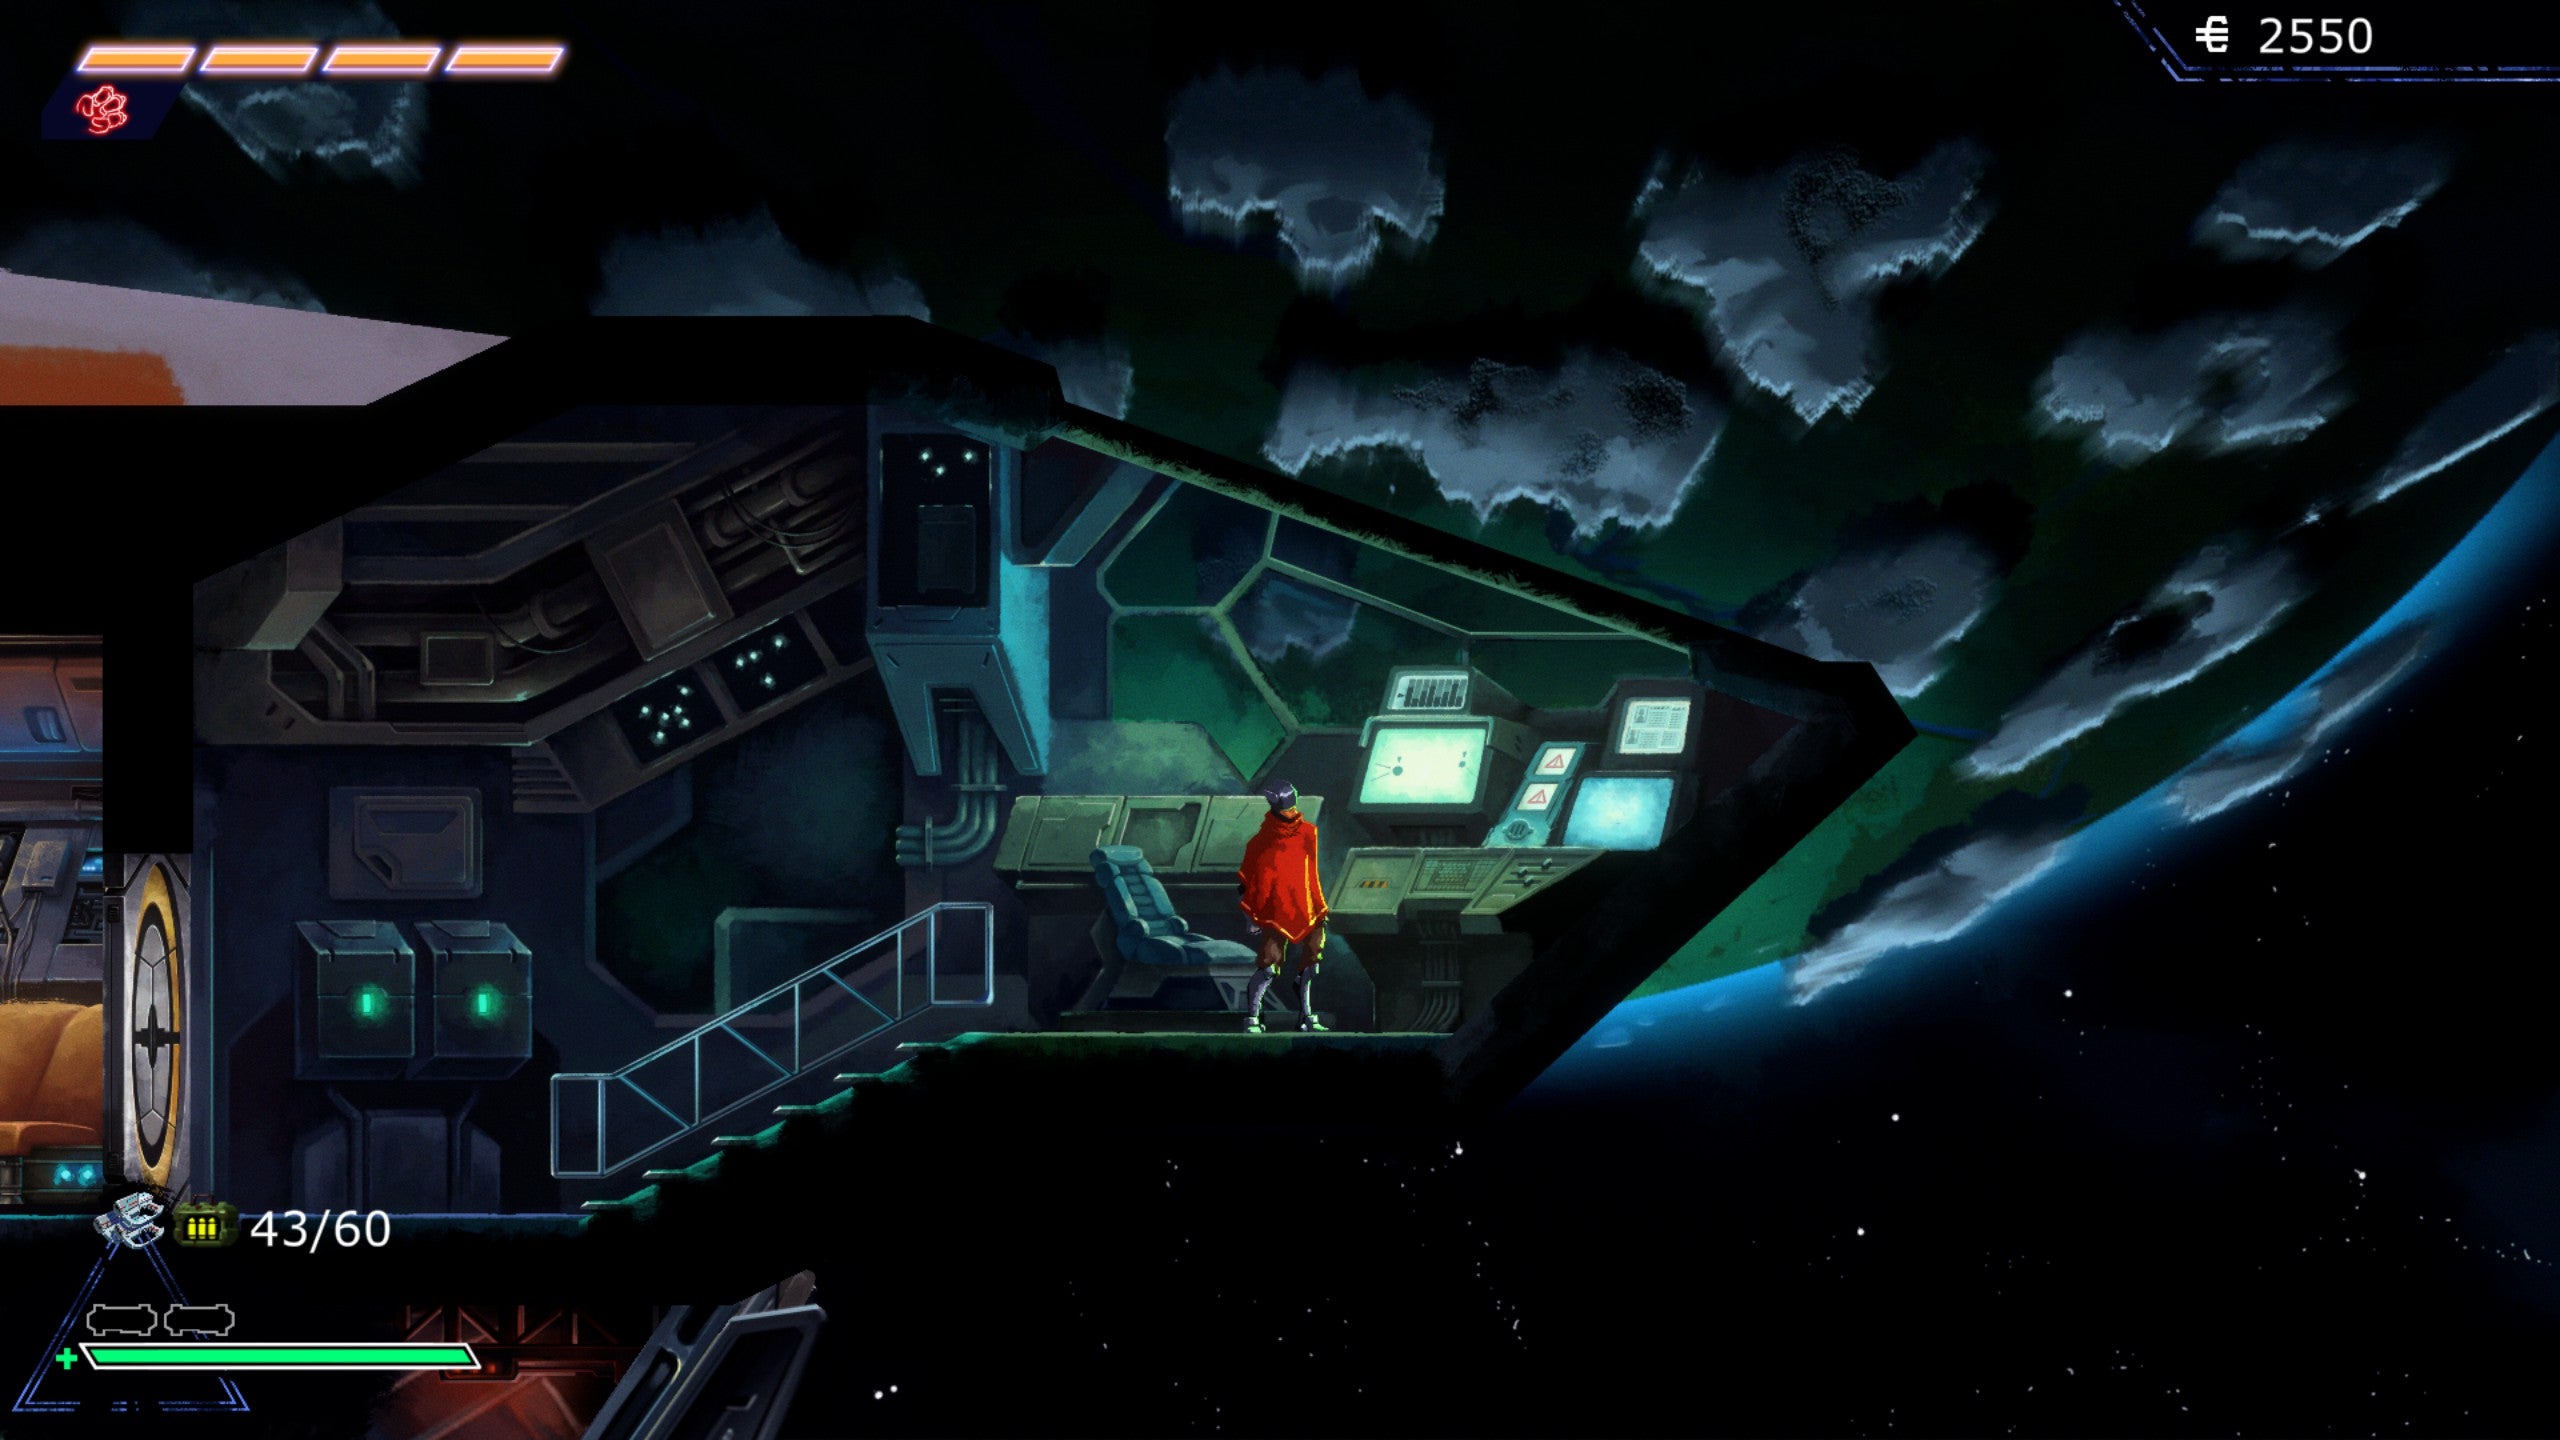 A screenshot from They Always Run. The player character is standing in a cockpit with a planet placed behind them.